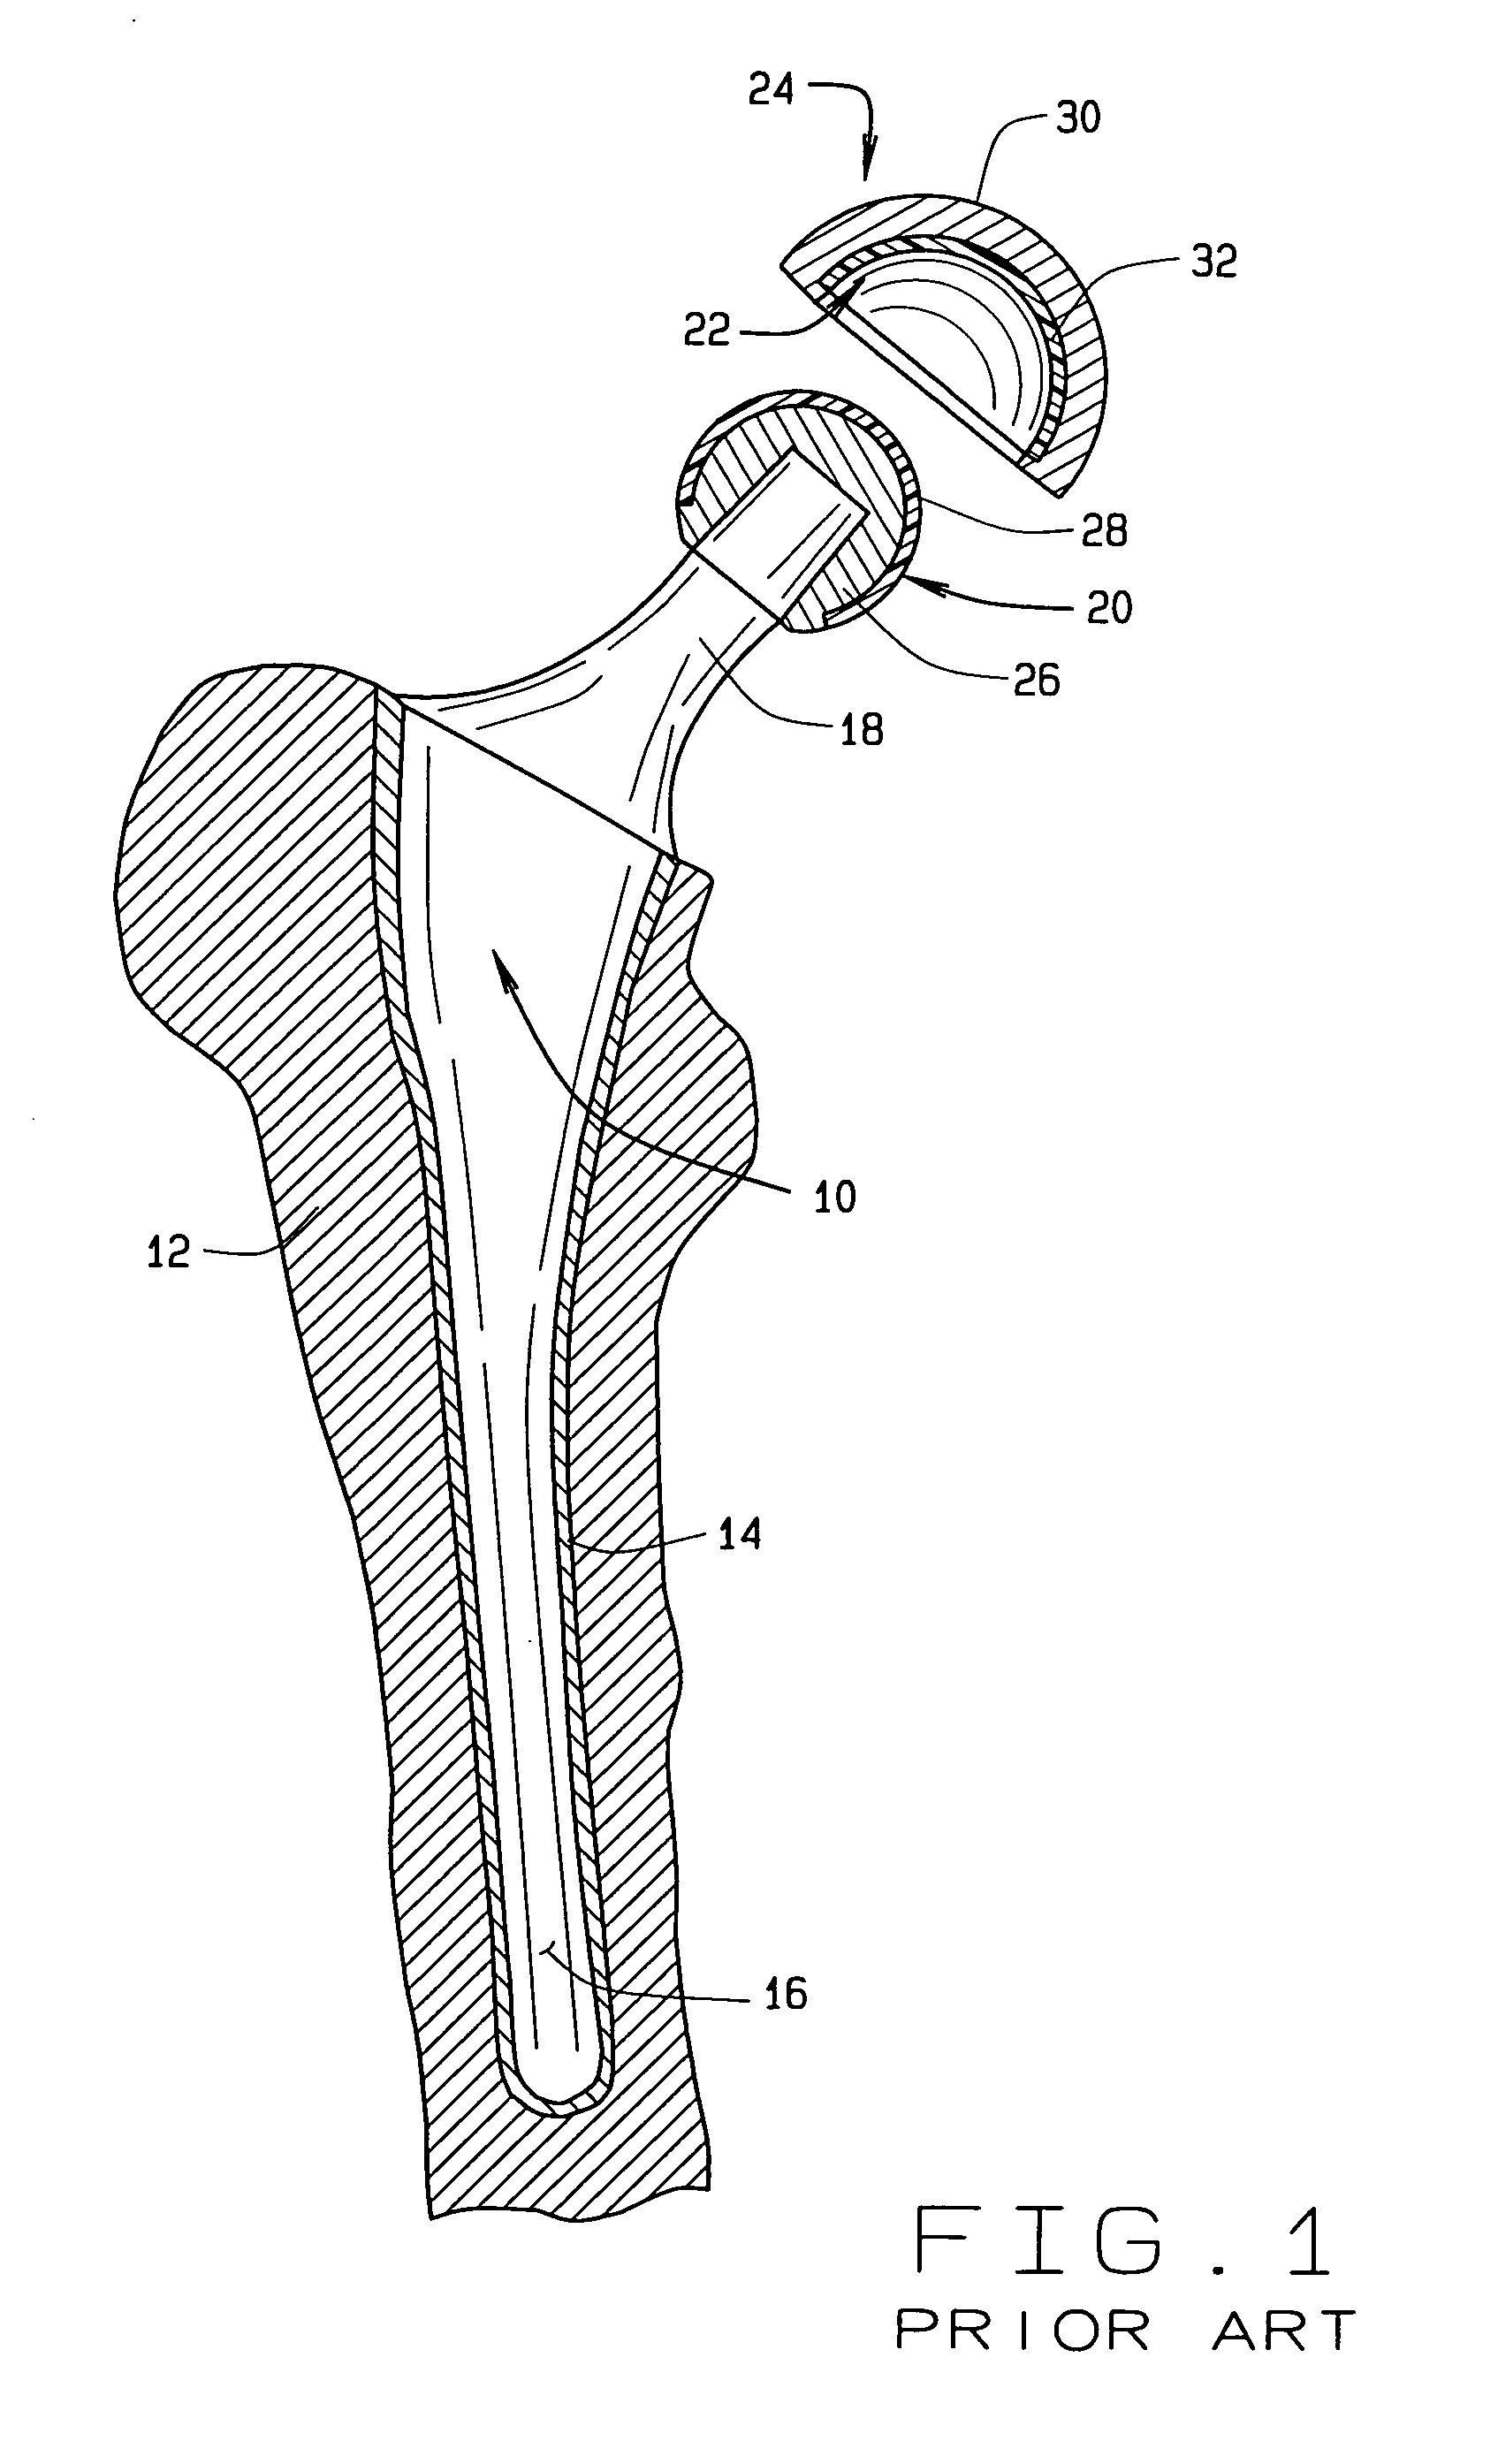 Coated ceramic total joint arthroplasty and method of making same